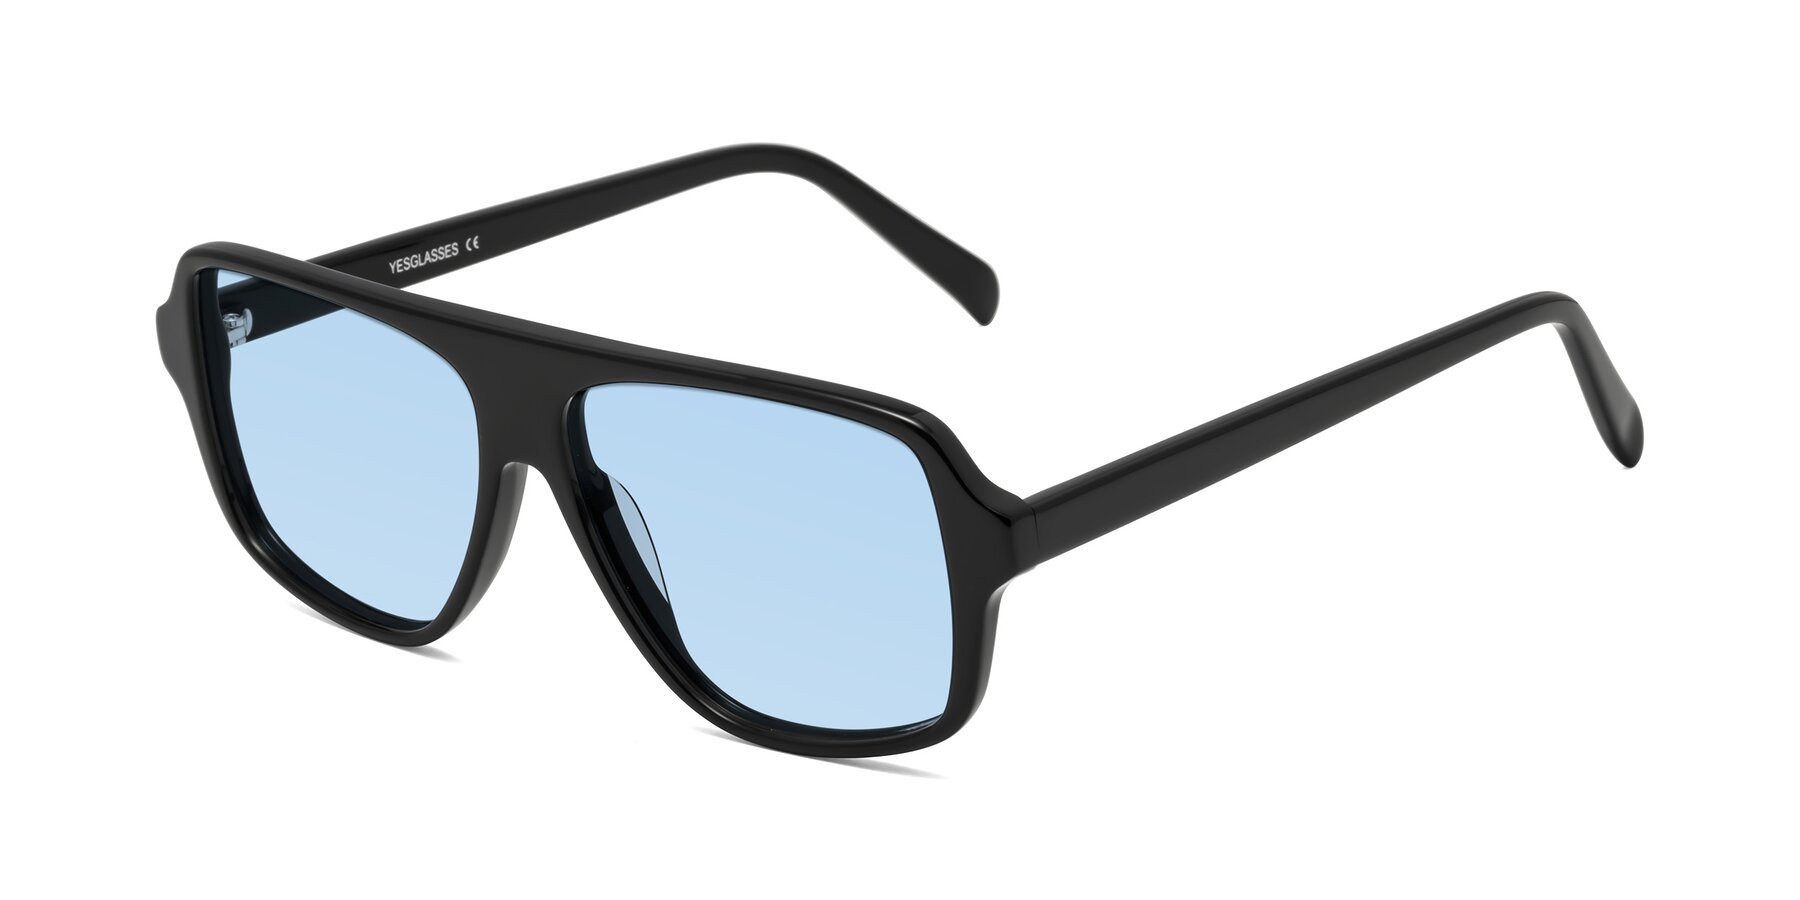 Angle of O'Leary in Black with Light Blue Tinted Lenses